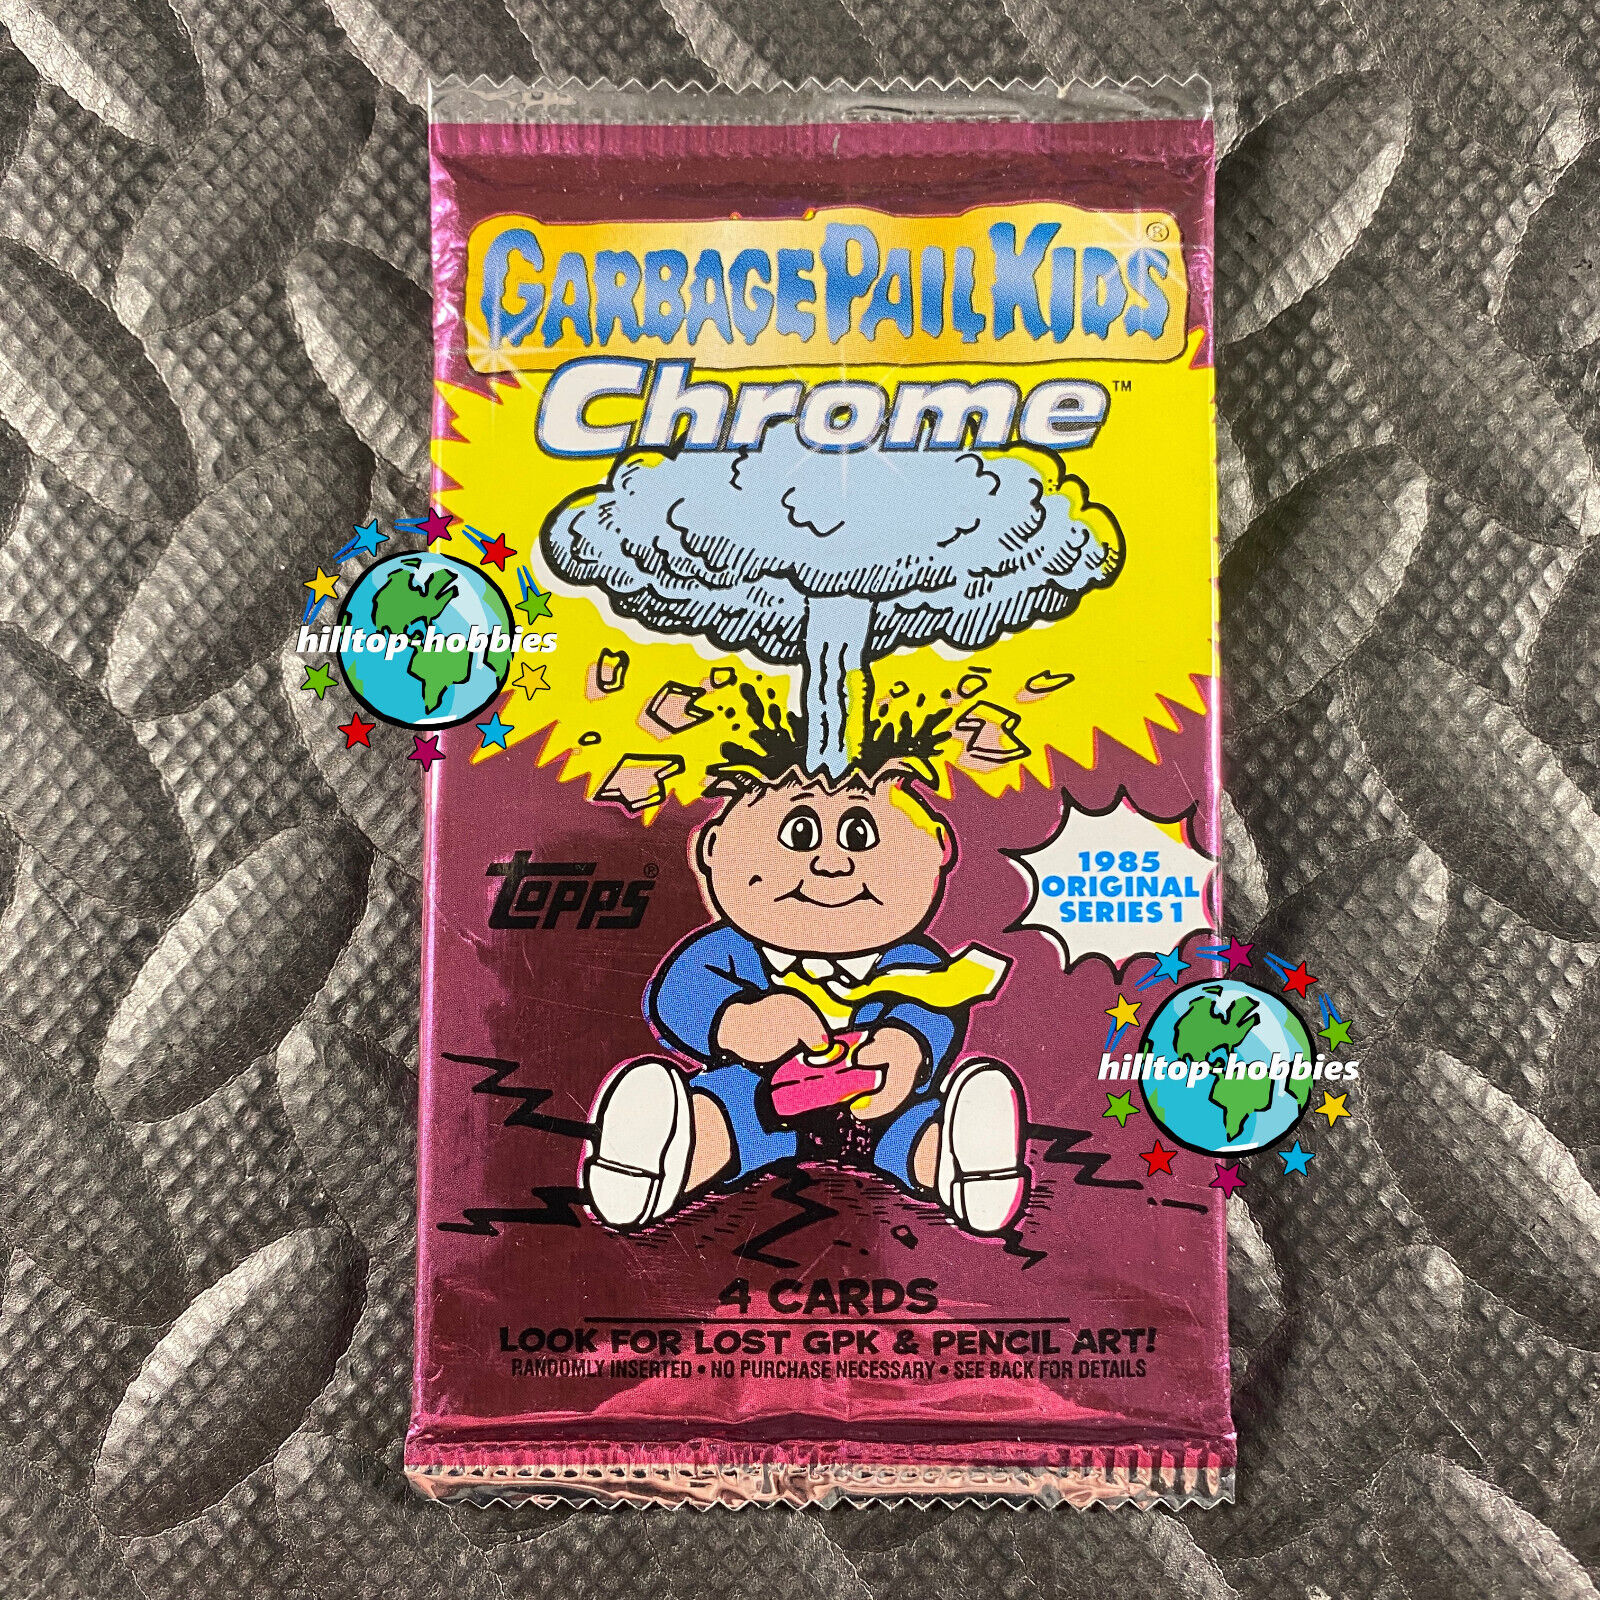 GARBAGE PAIL KIDS 2013 CHROME 1 1ST SERIES NEW/SEALED PACK 4-CARDS TOPPS